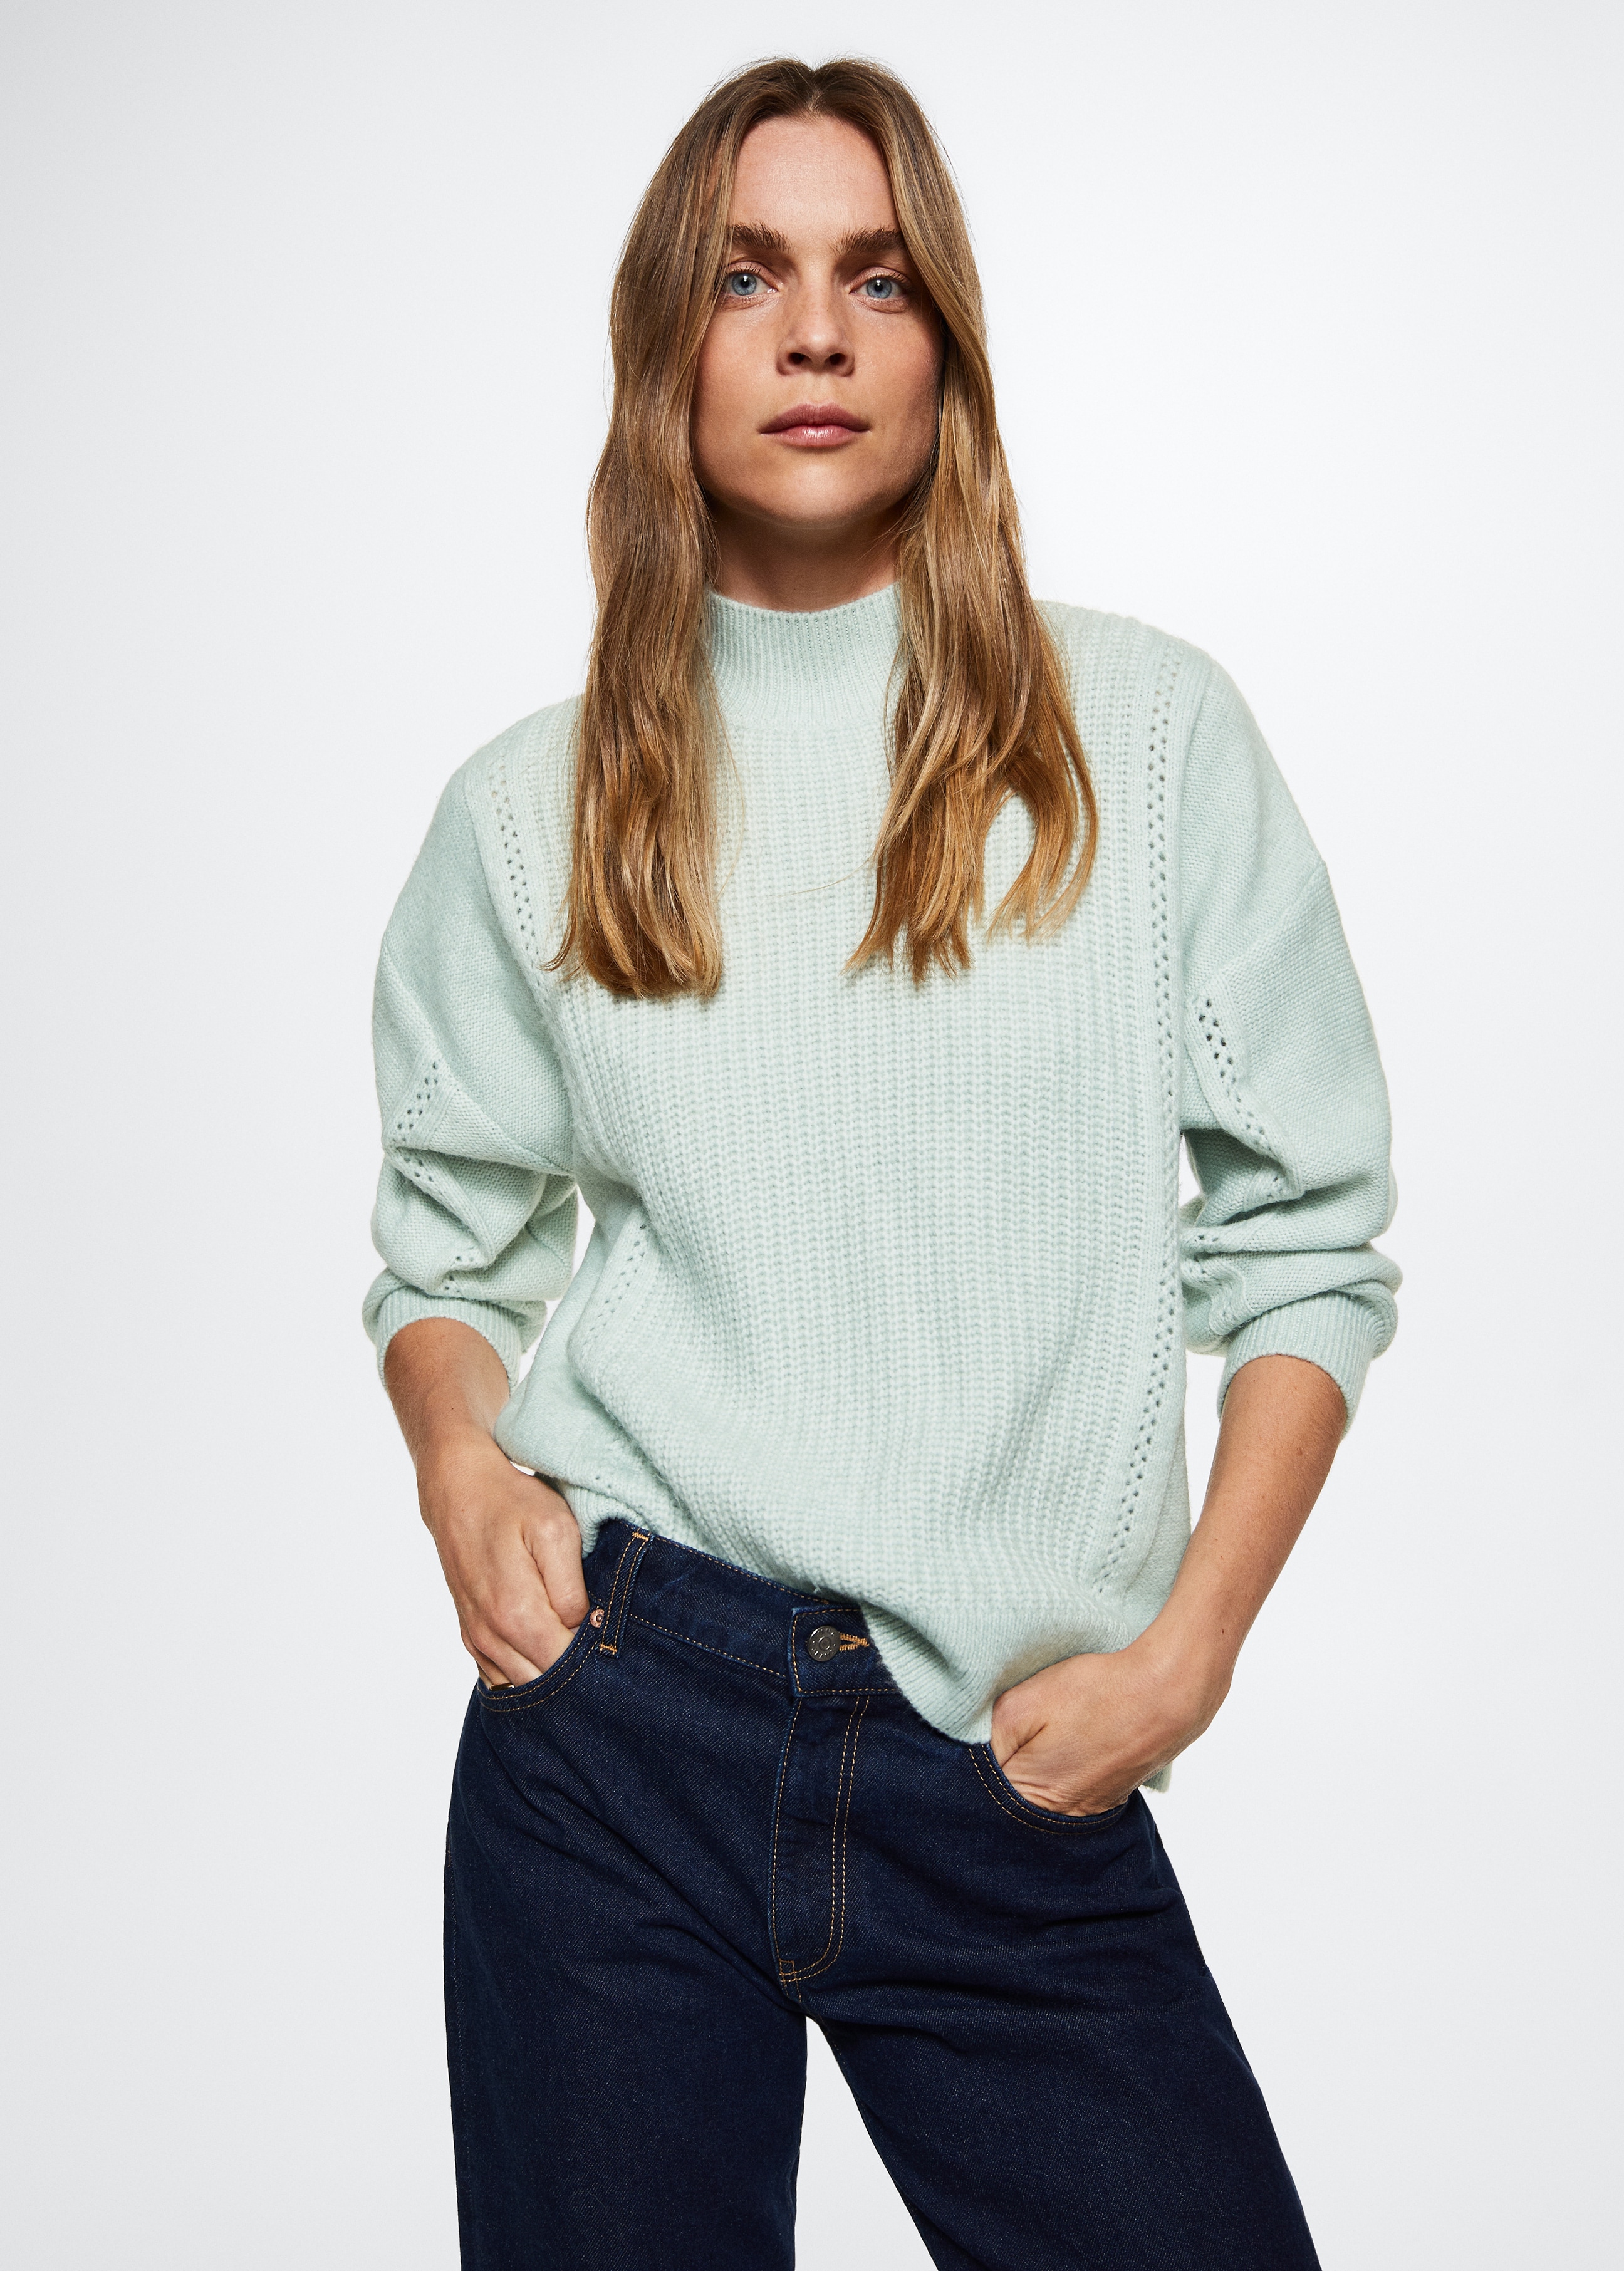 Perkins neck knitted sweater